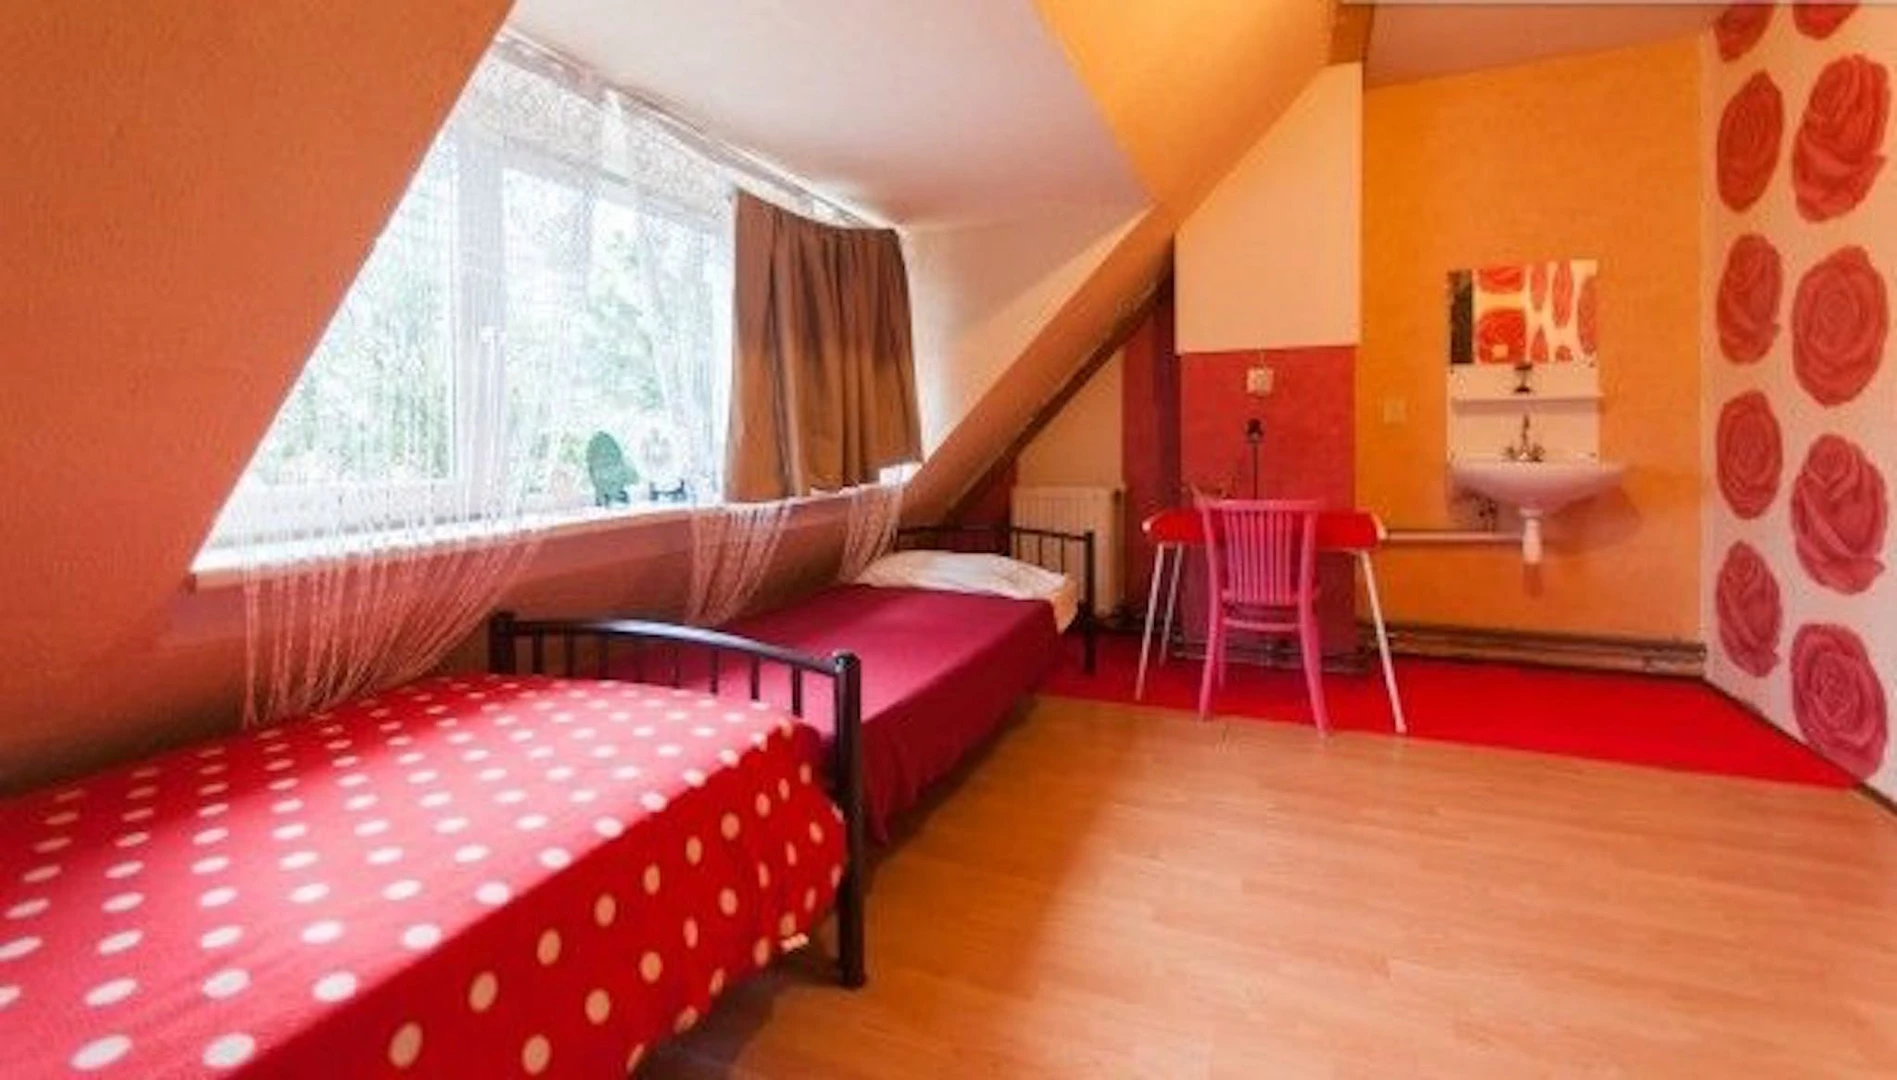 Cheap shared room in Rotterdam